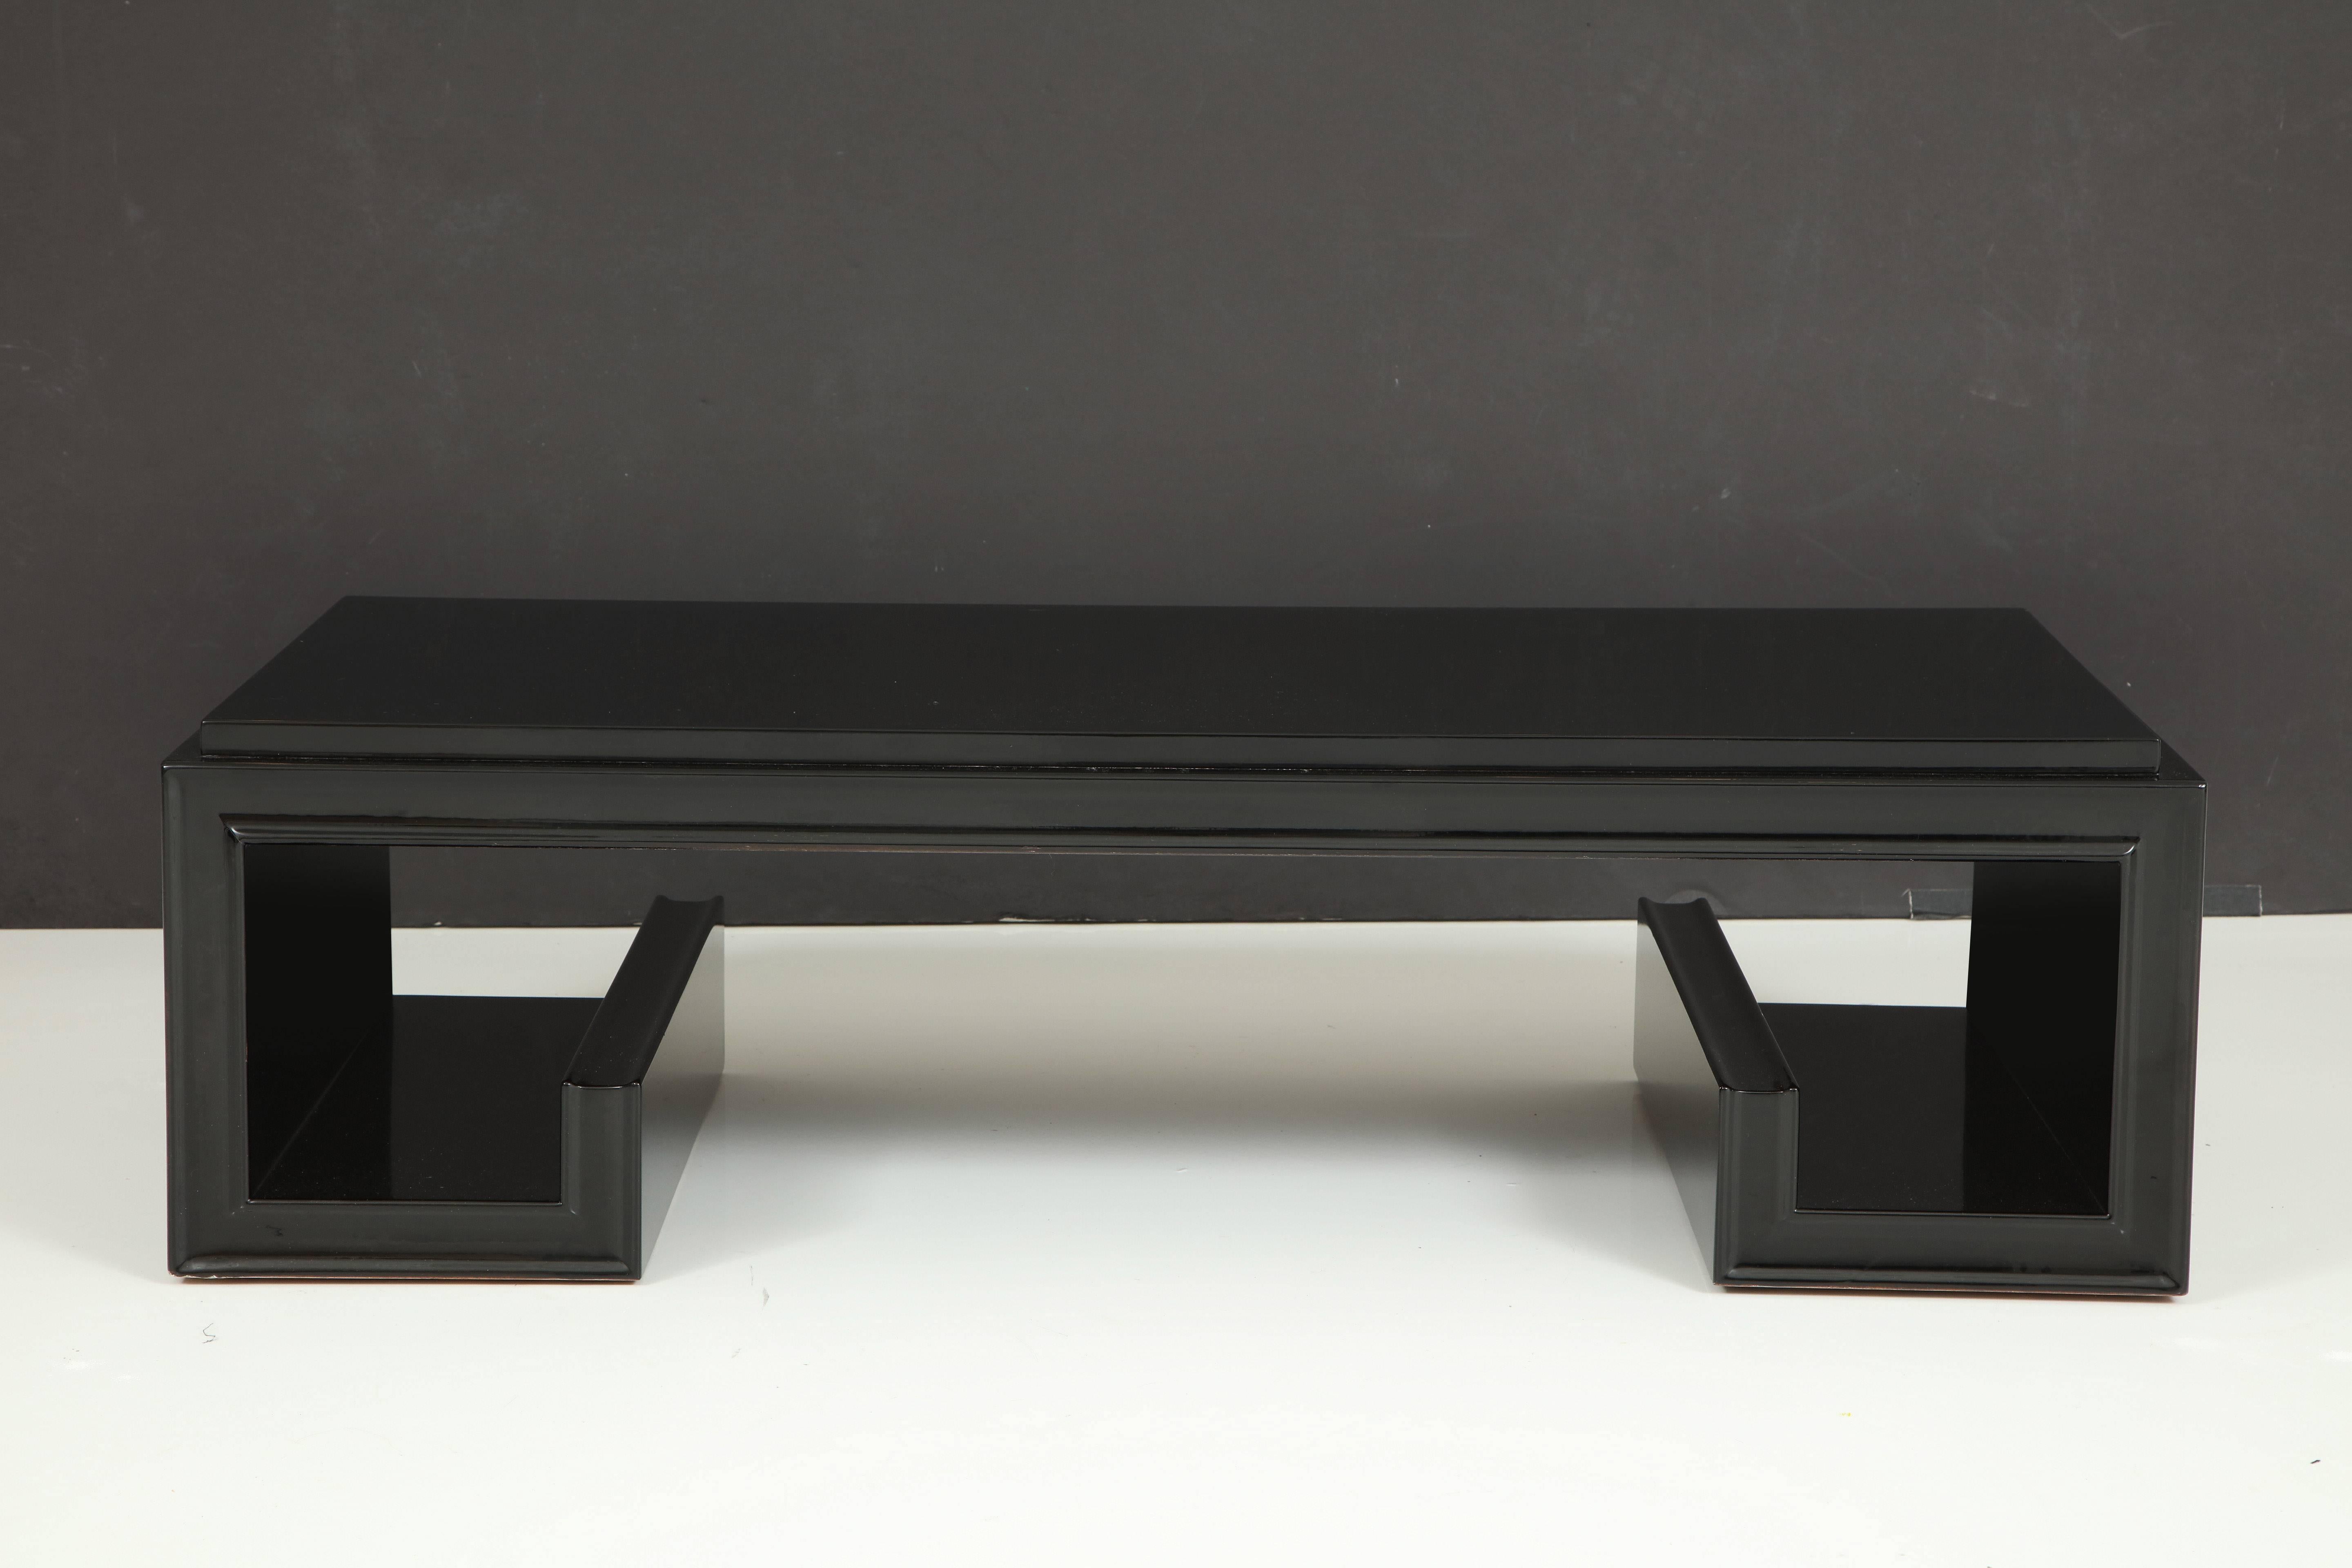 Beautiful Greek Key coffee table by James Mont.
This elegant table which is absolutely stunning, now that it has been newly refinished in a very high gloss black lacquer.
The table is branded on the bottom 